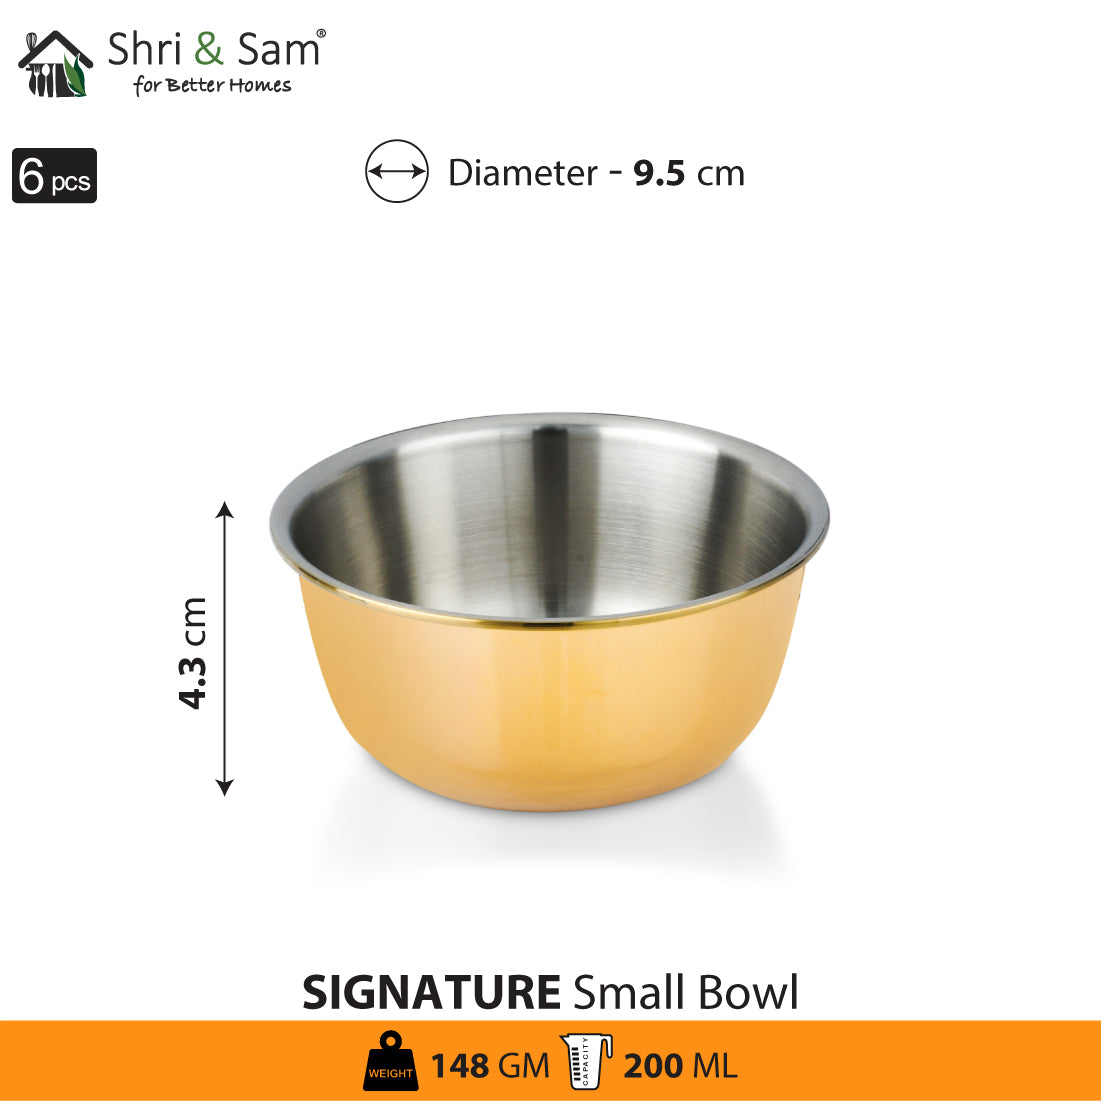 Stainless Steel 6 PCS Small Bowl with Gold PVD Coating Signature - Matt